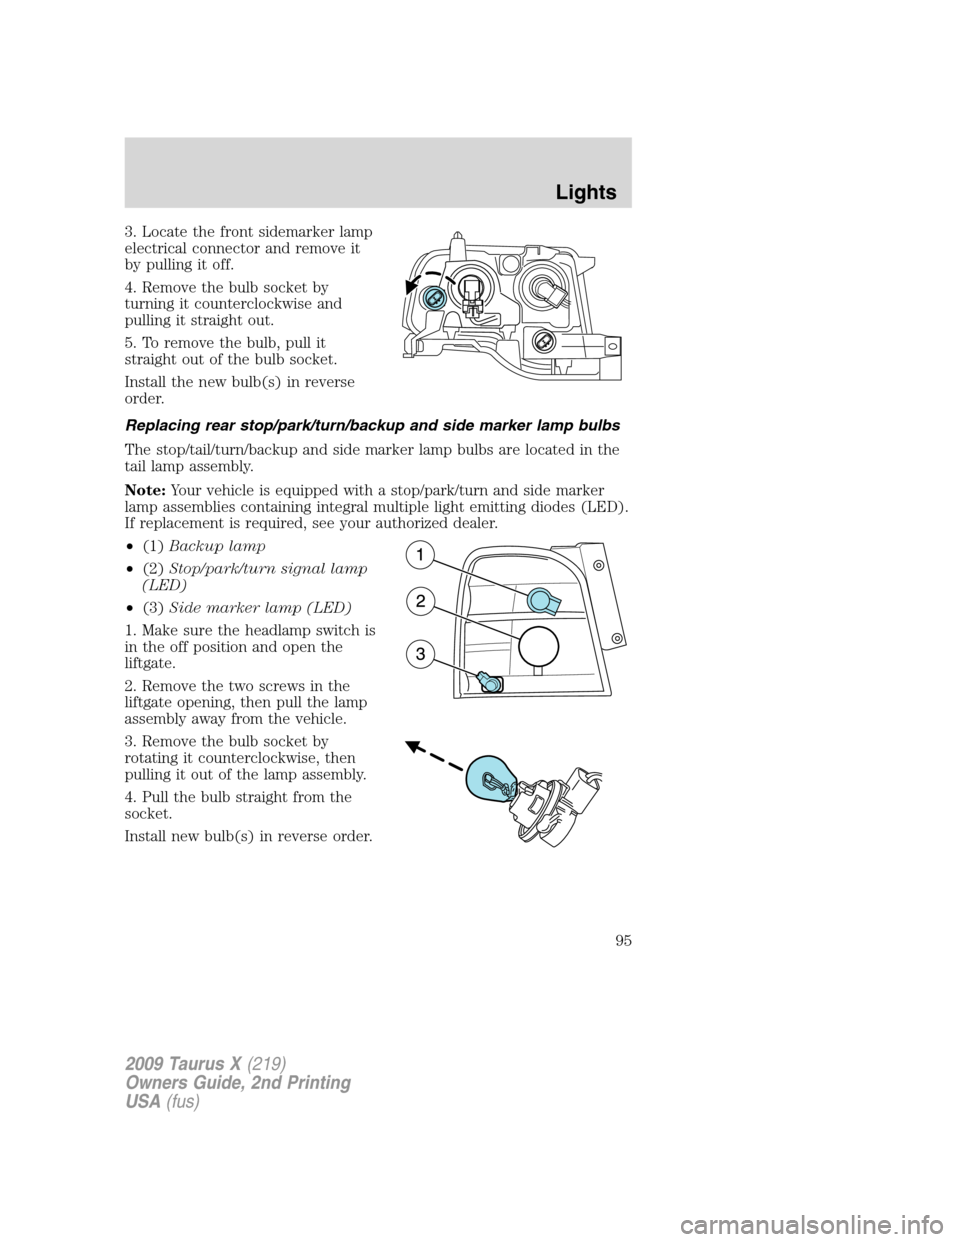 FORD TAURUS X 2009 1.G Owners Manual 3. Locate the front sidemarker lamp
electrical connector and remove it
by pulling it off.
4. Remove the bulb socket by
turning it counterclockwise and
pulling it straight out.
5. To remove the bulb, p